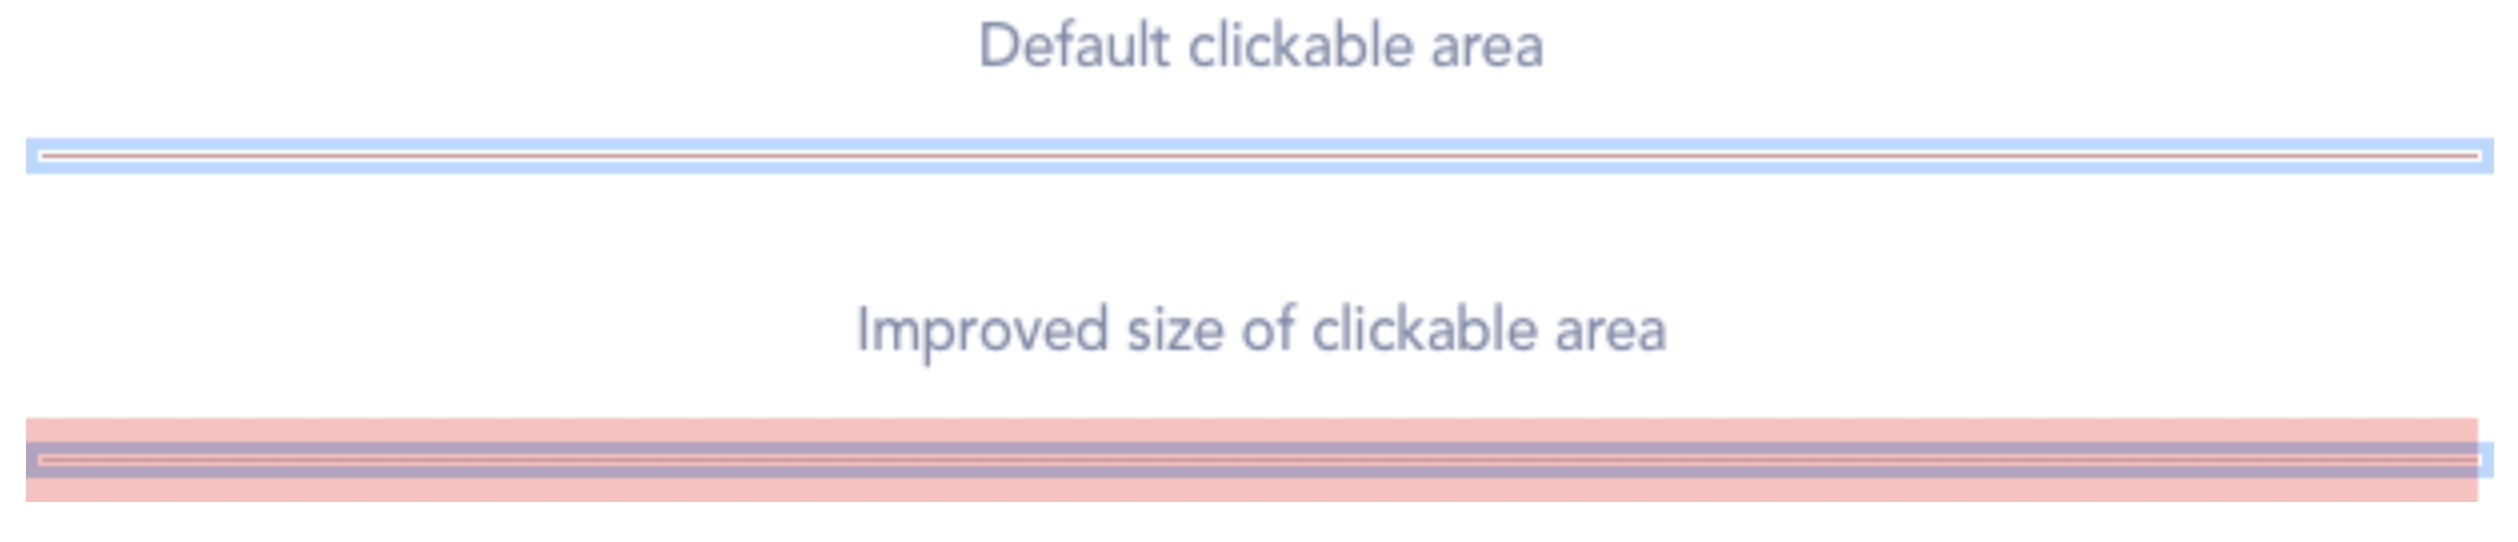 Improved size of clickable area 